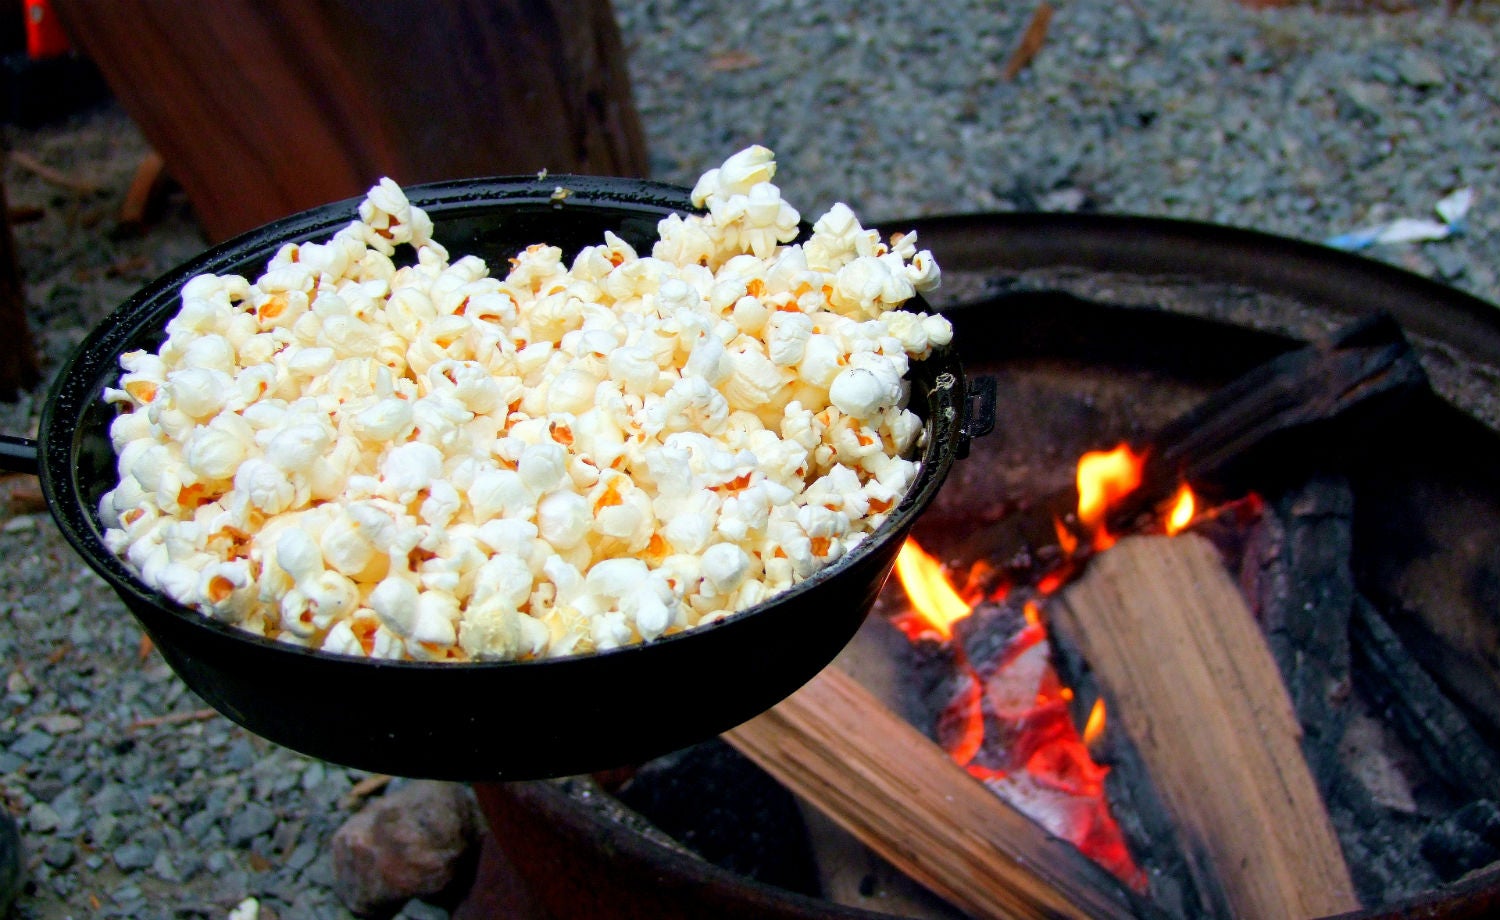 How Do You Make Popcorn When Camping? 